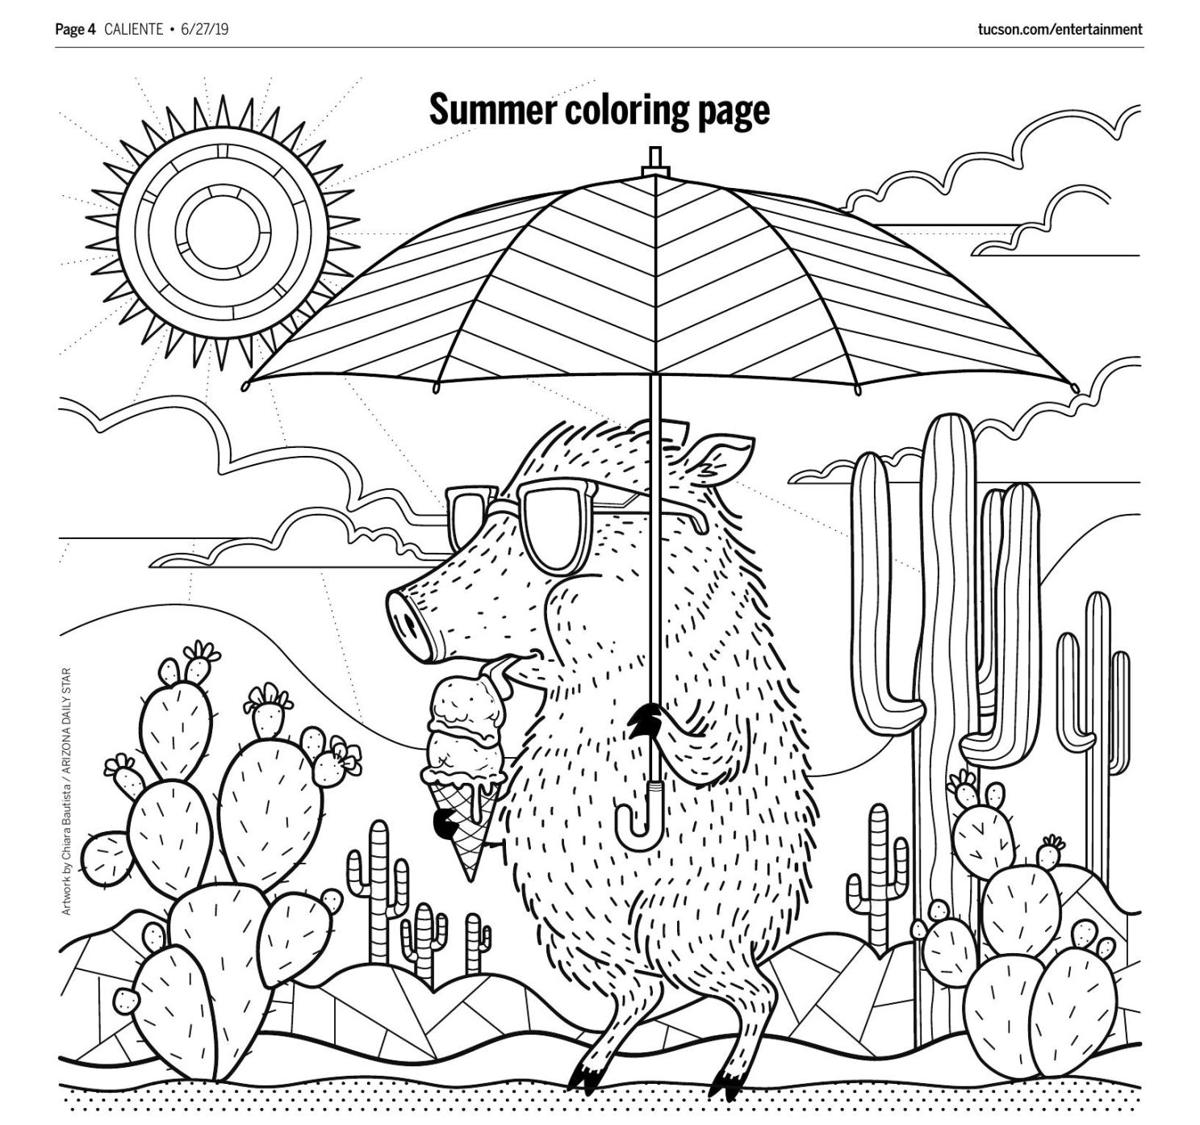 Sætte egetræ Mold Print out these 12 totally adorable Tucson-themed coloring pages